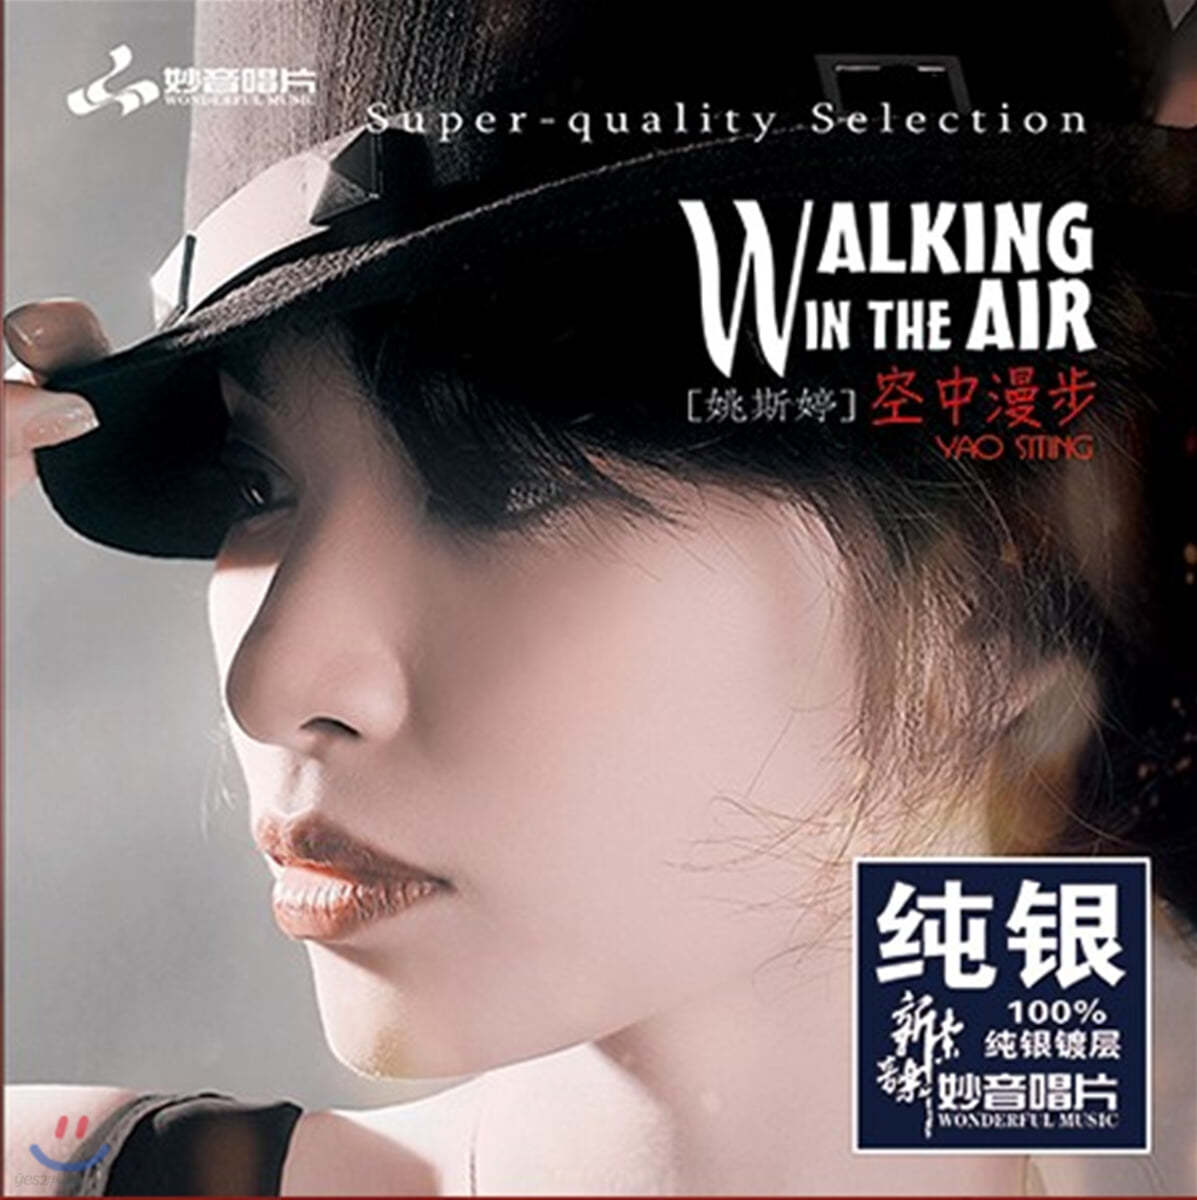 Yao Si Ting (야오시팅) - Walking In The Air 